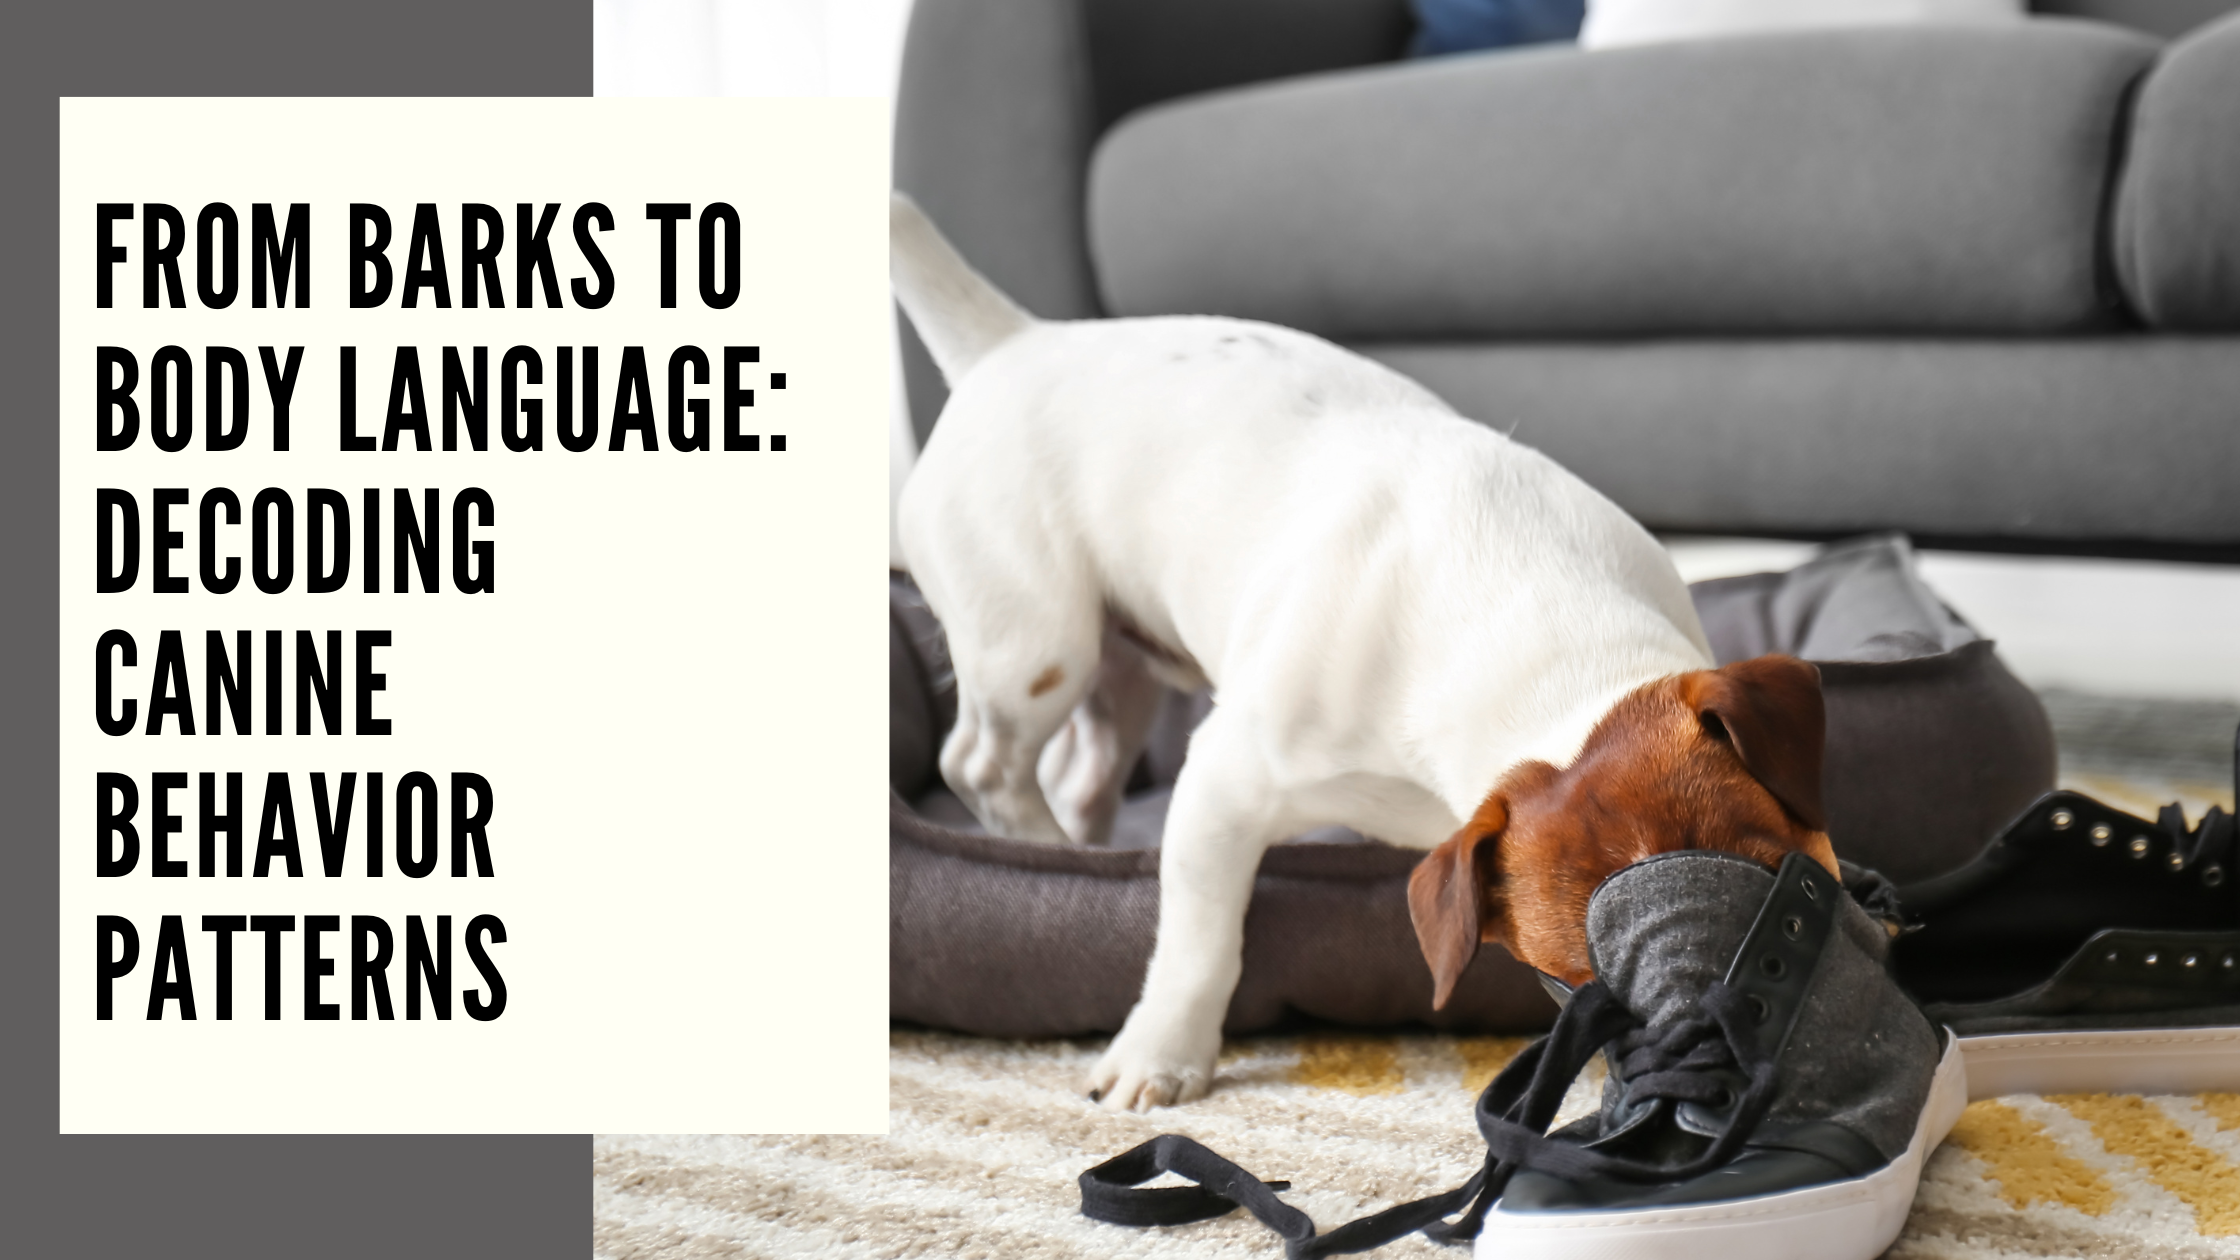 From Barks to Body Language Decoding Canine Behavior Patterns